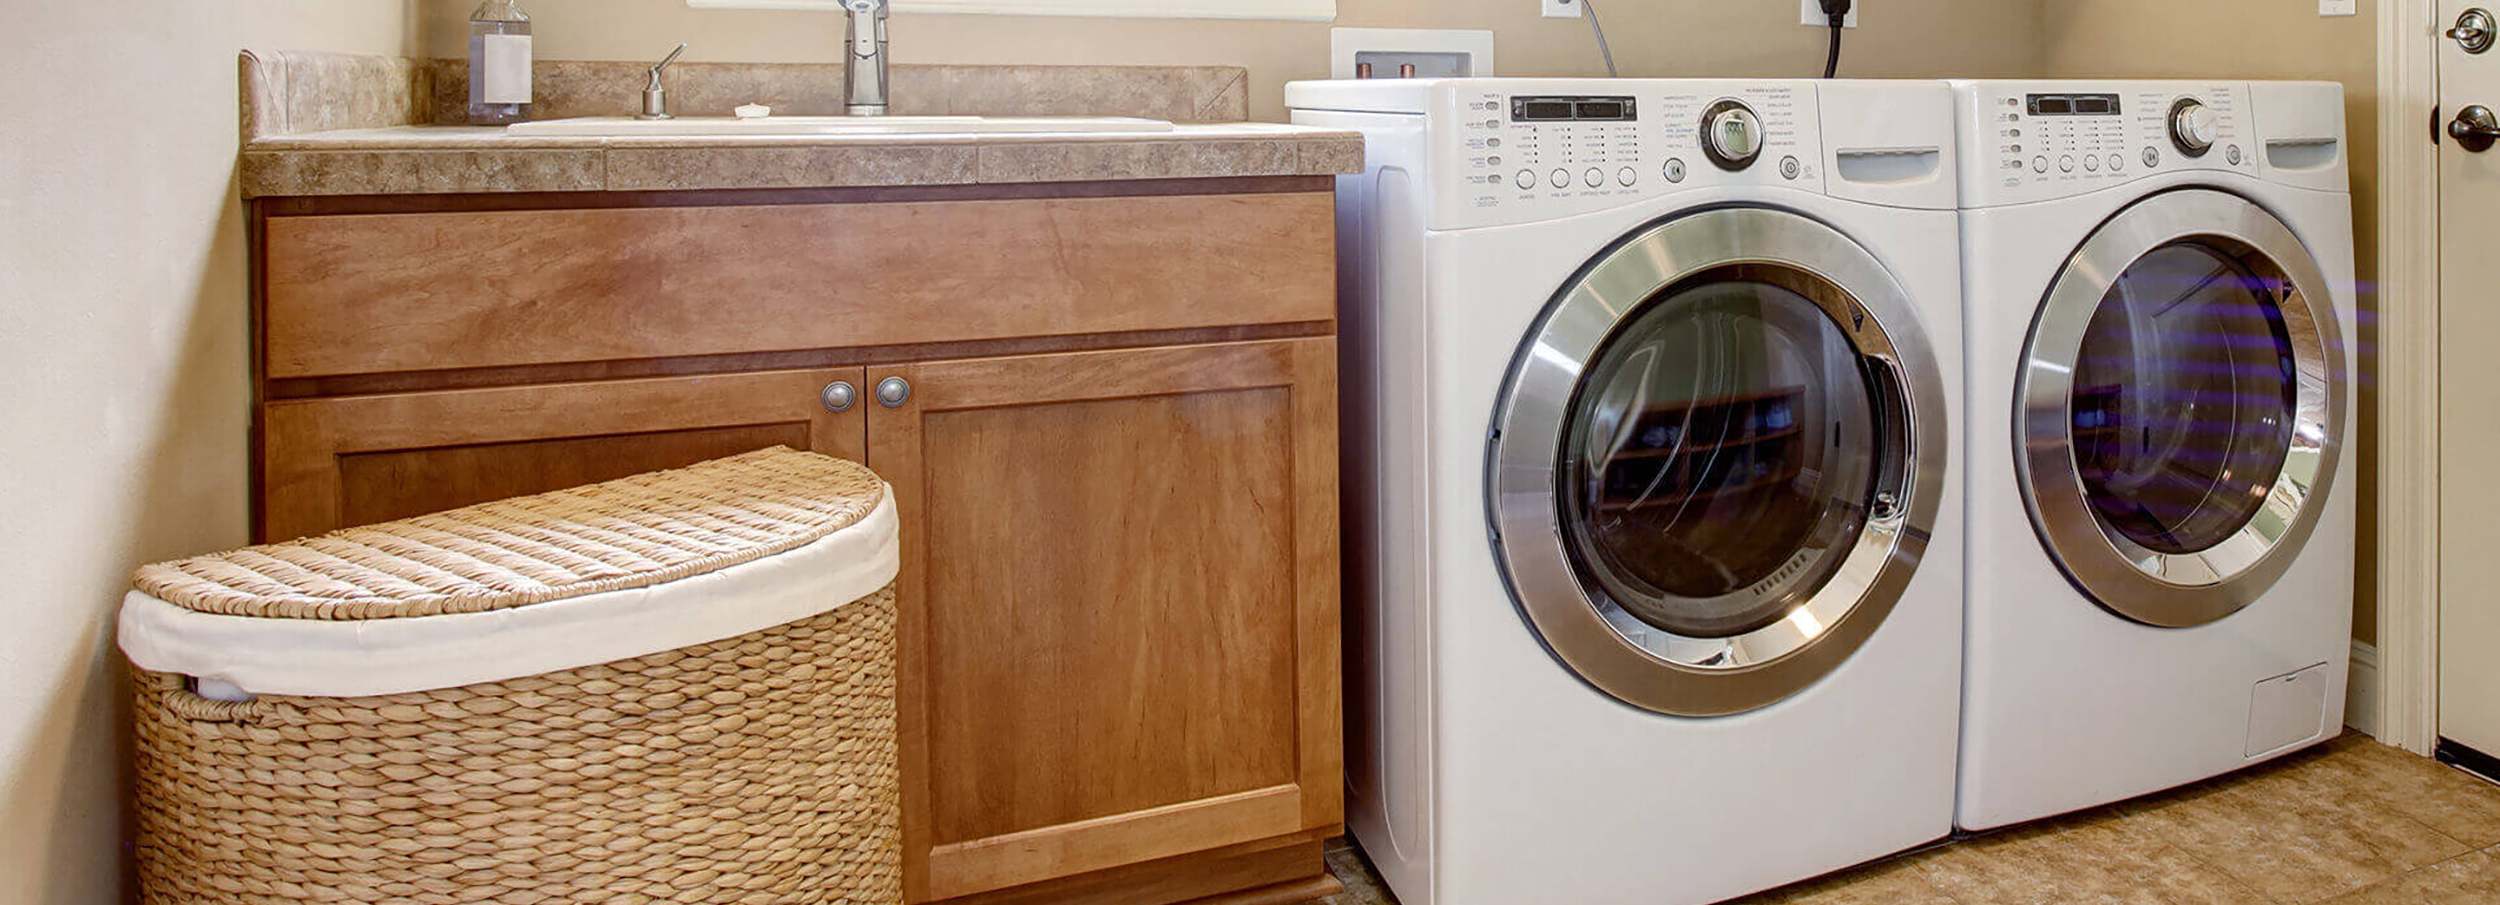 : White washing machine and dryer beside sink in tidy home laundry room.